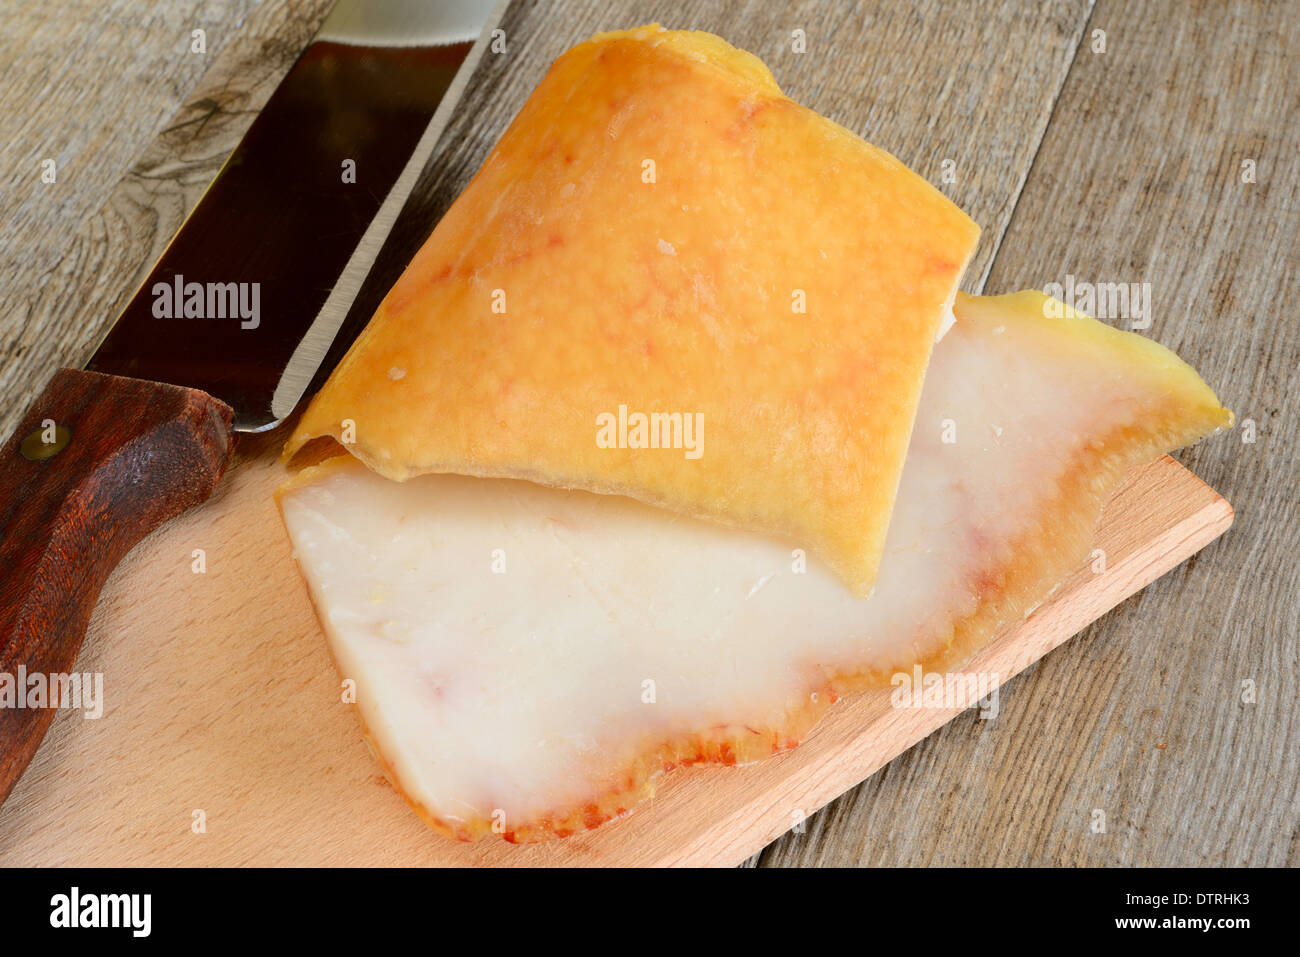 slice of pork rind grease optimal for cooking Stock Photo